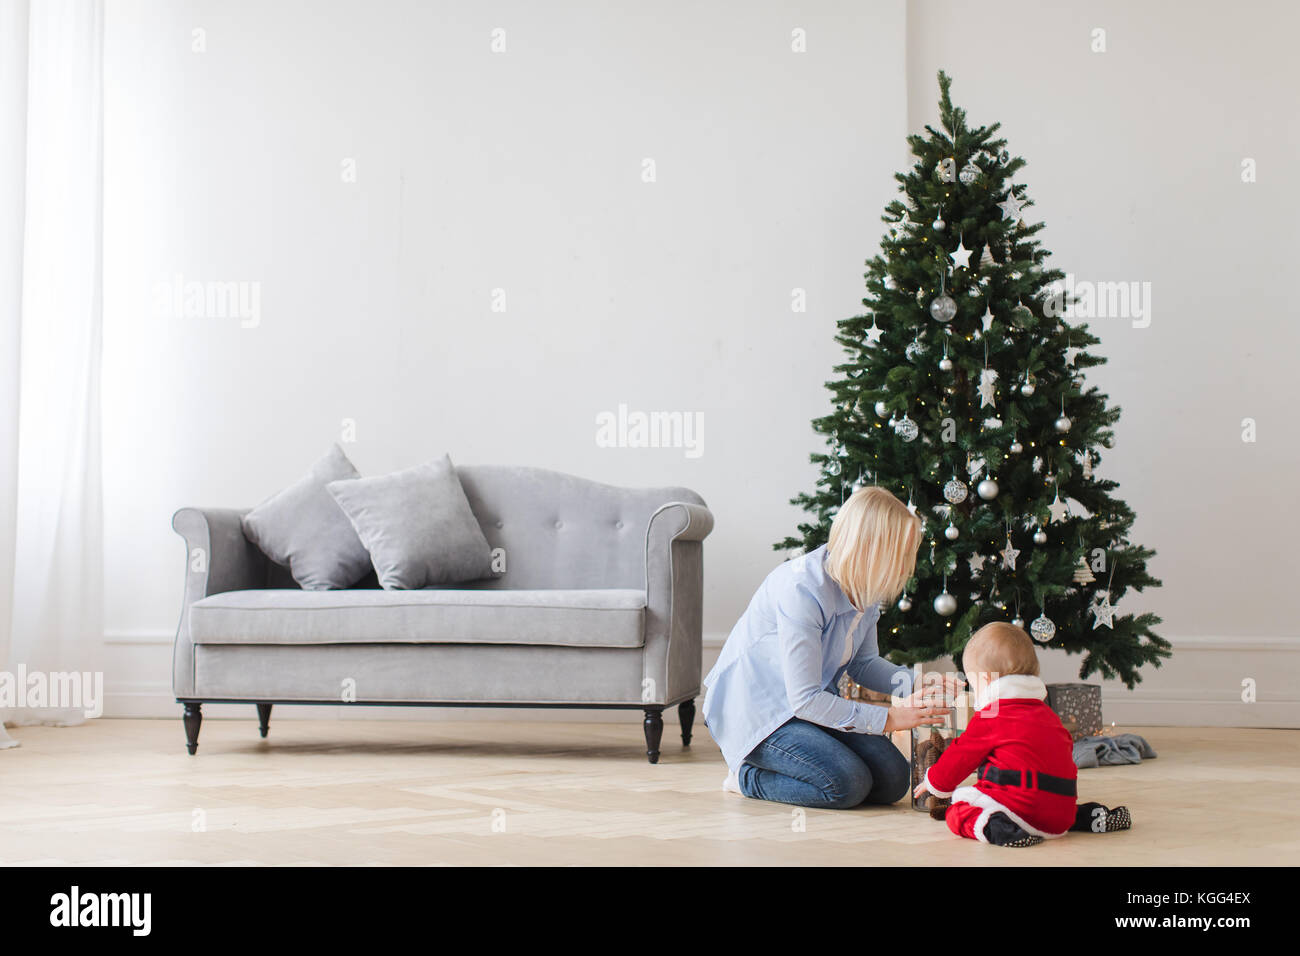 Mother with child opening presents Stock Photo